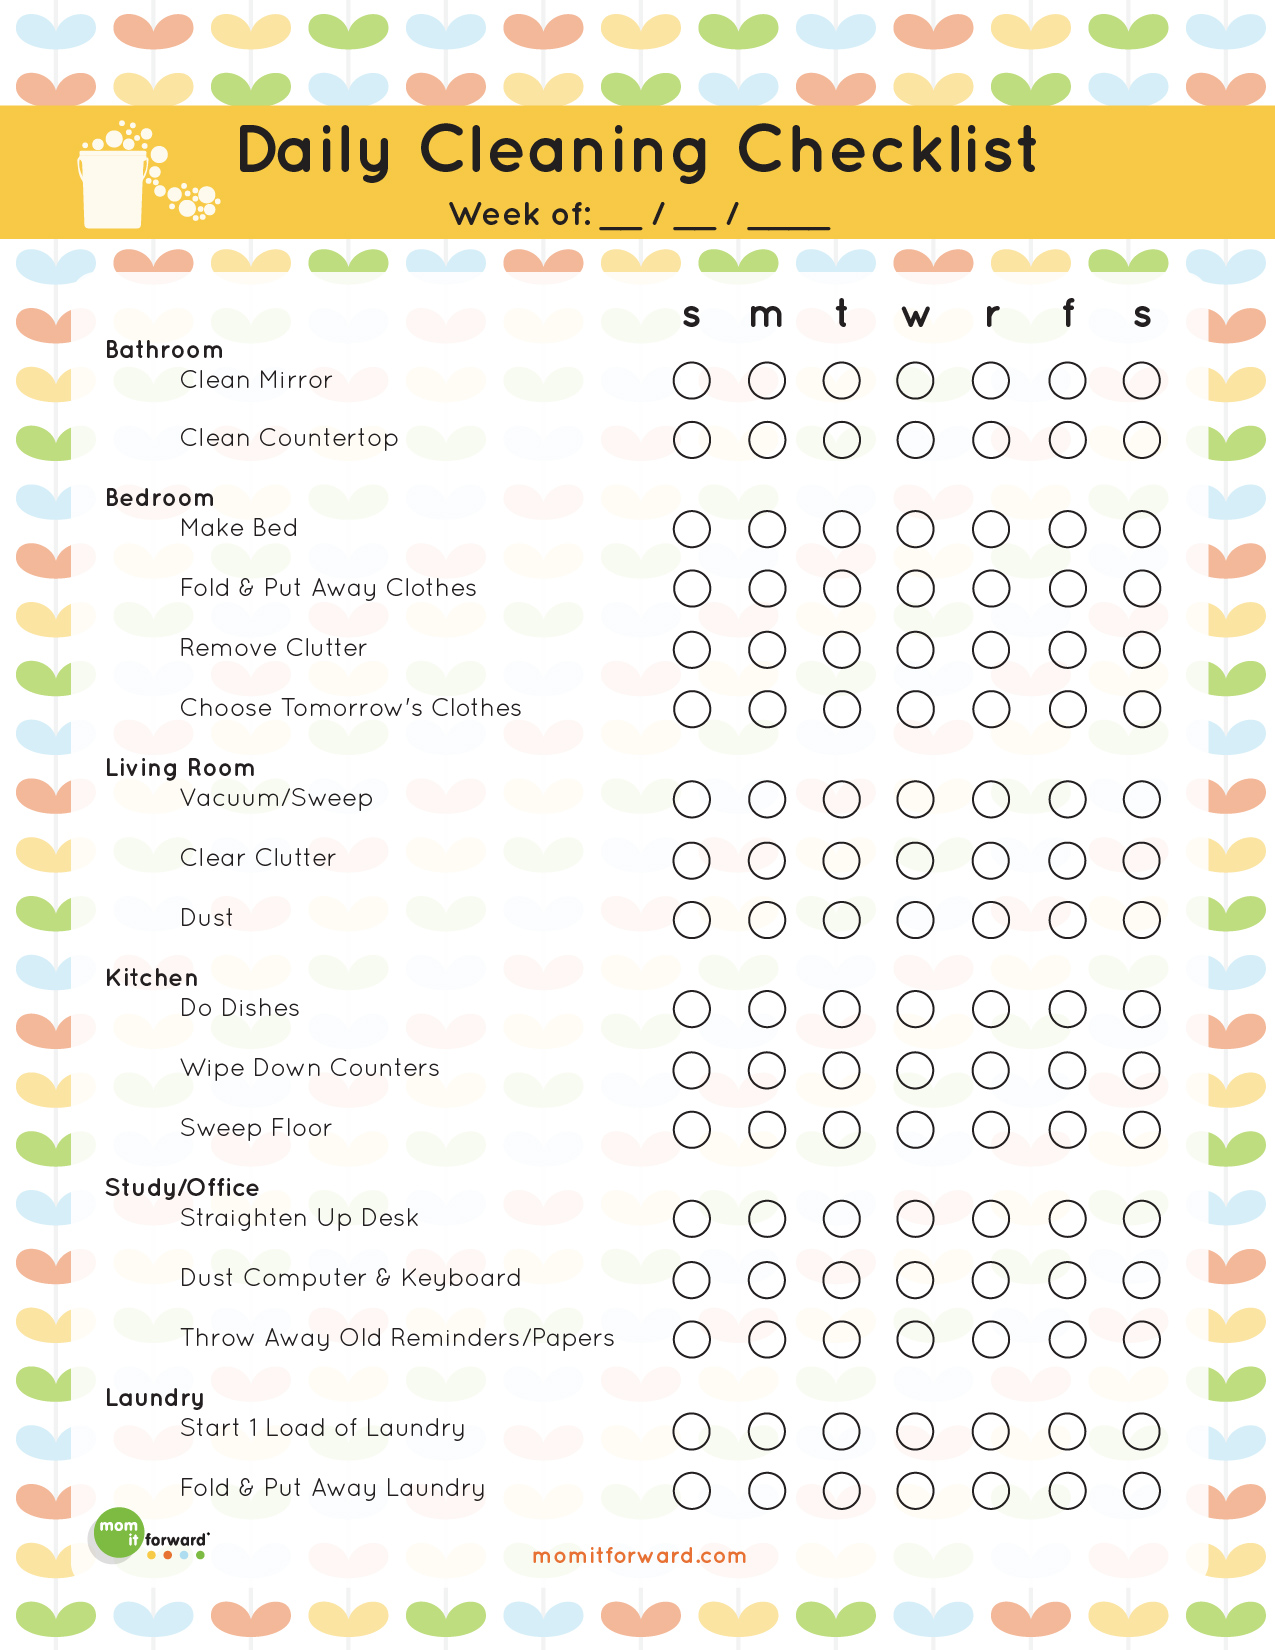 5-best-images-of-daily-house-cleaning-schedule-printable-weekly-house-cleaning-schedule-daily